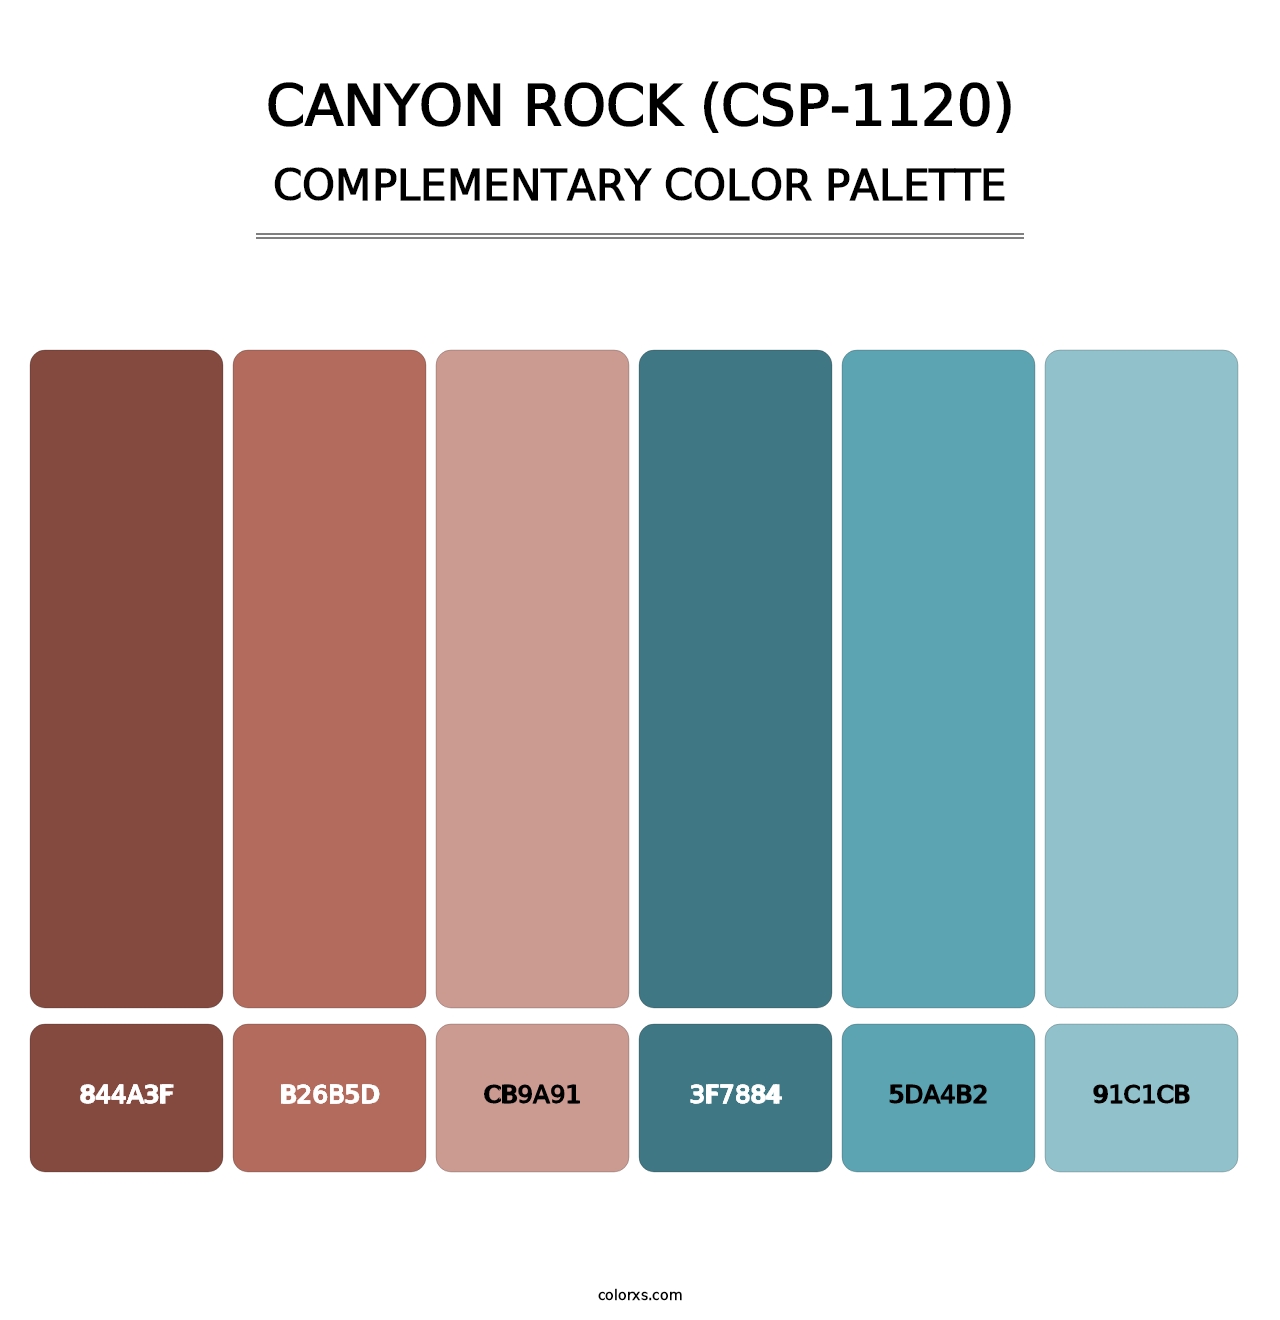 Canyon Rock (CSP-1120) - Complementary Color Palette